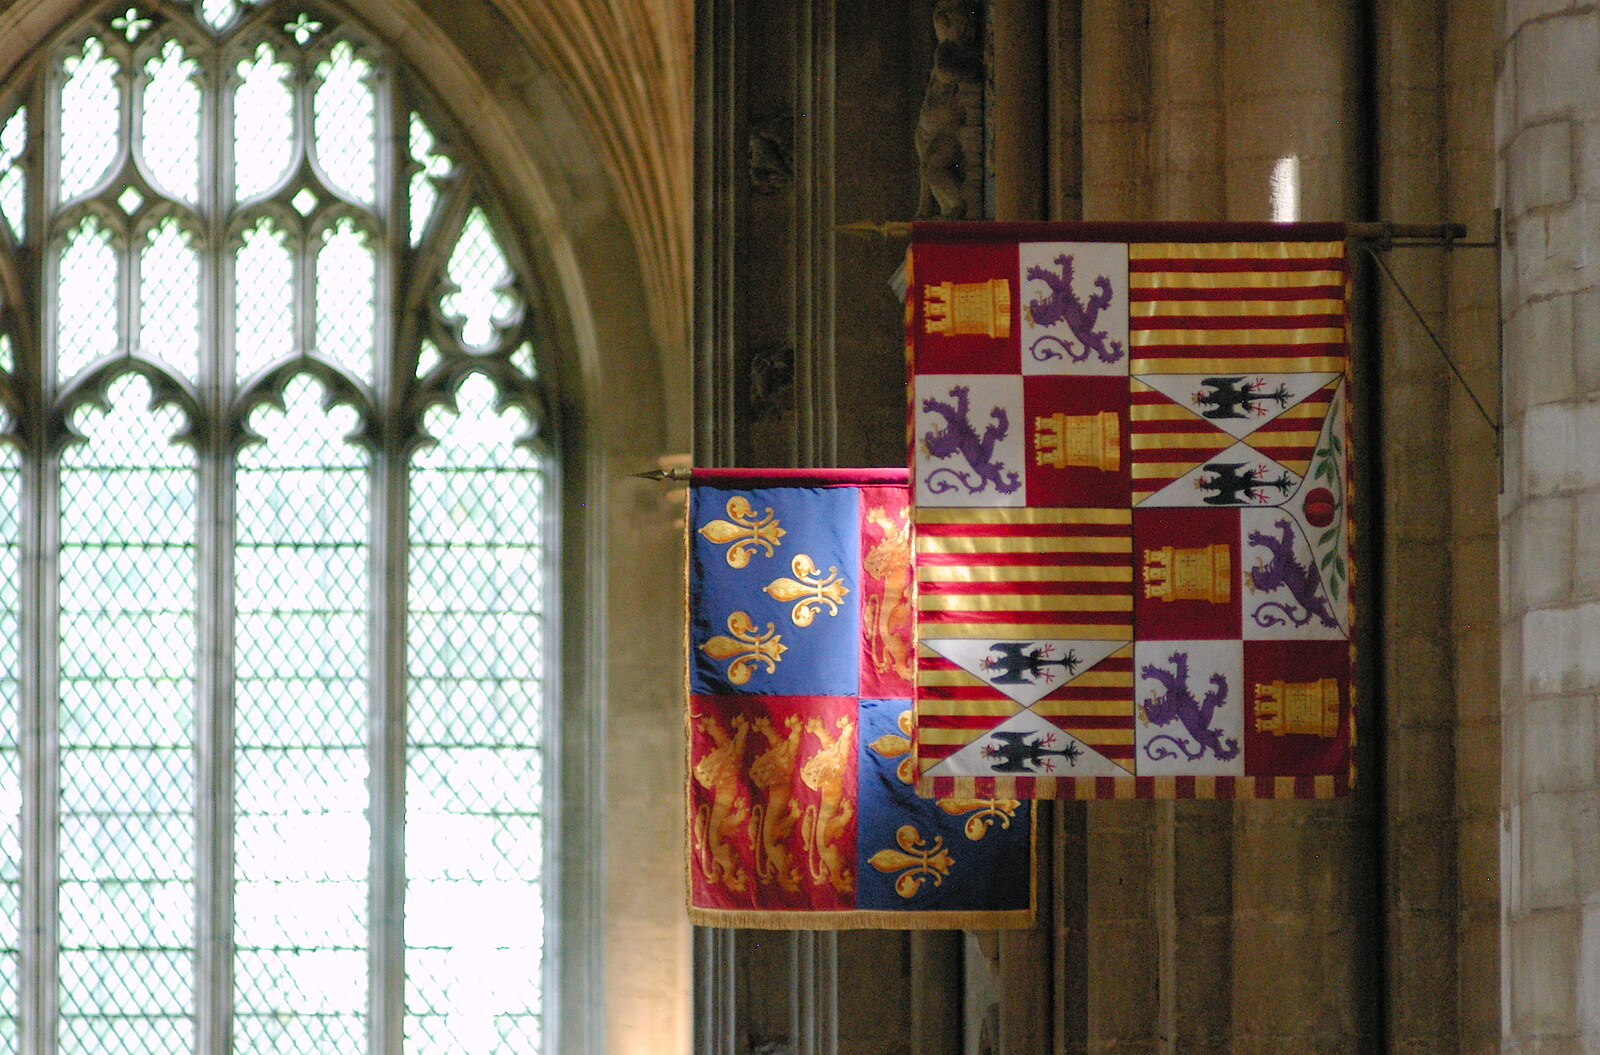 Some royal standards from Peterborough Cathedral, Cambridgeshire - 7th September 2005